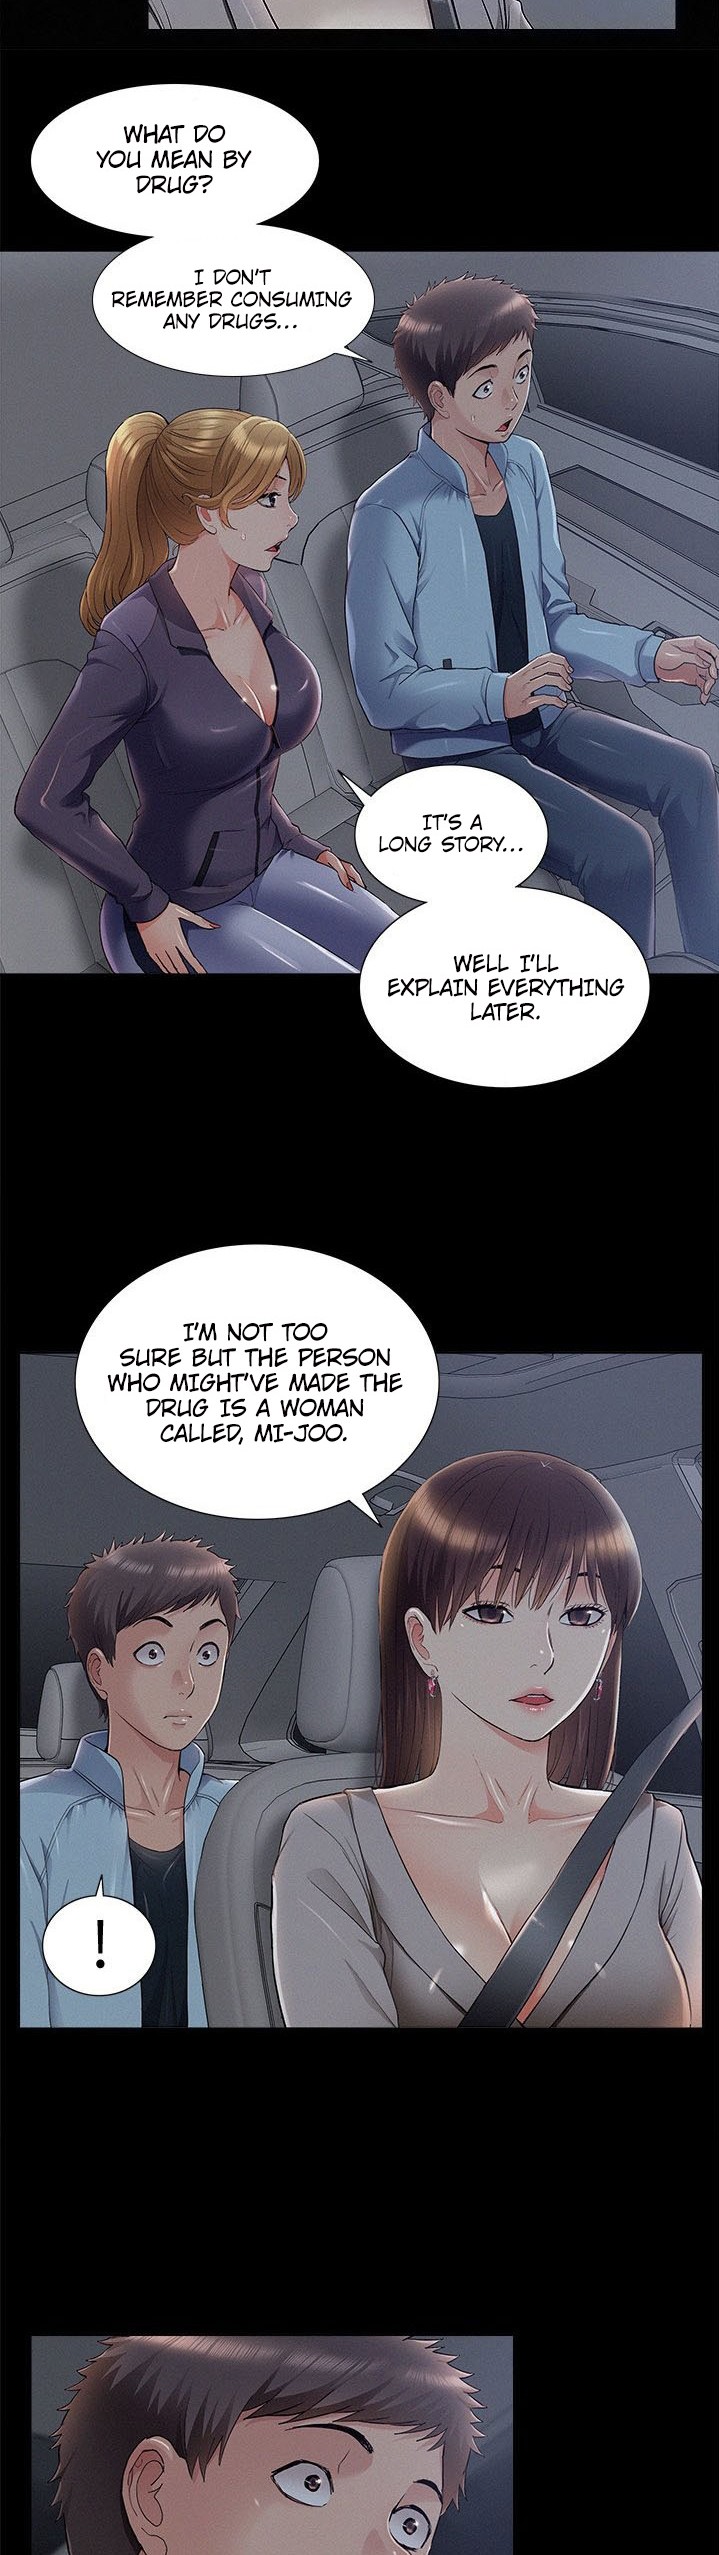 Your Situation - Chapter 49 Page 13